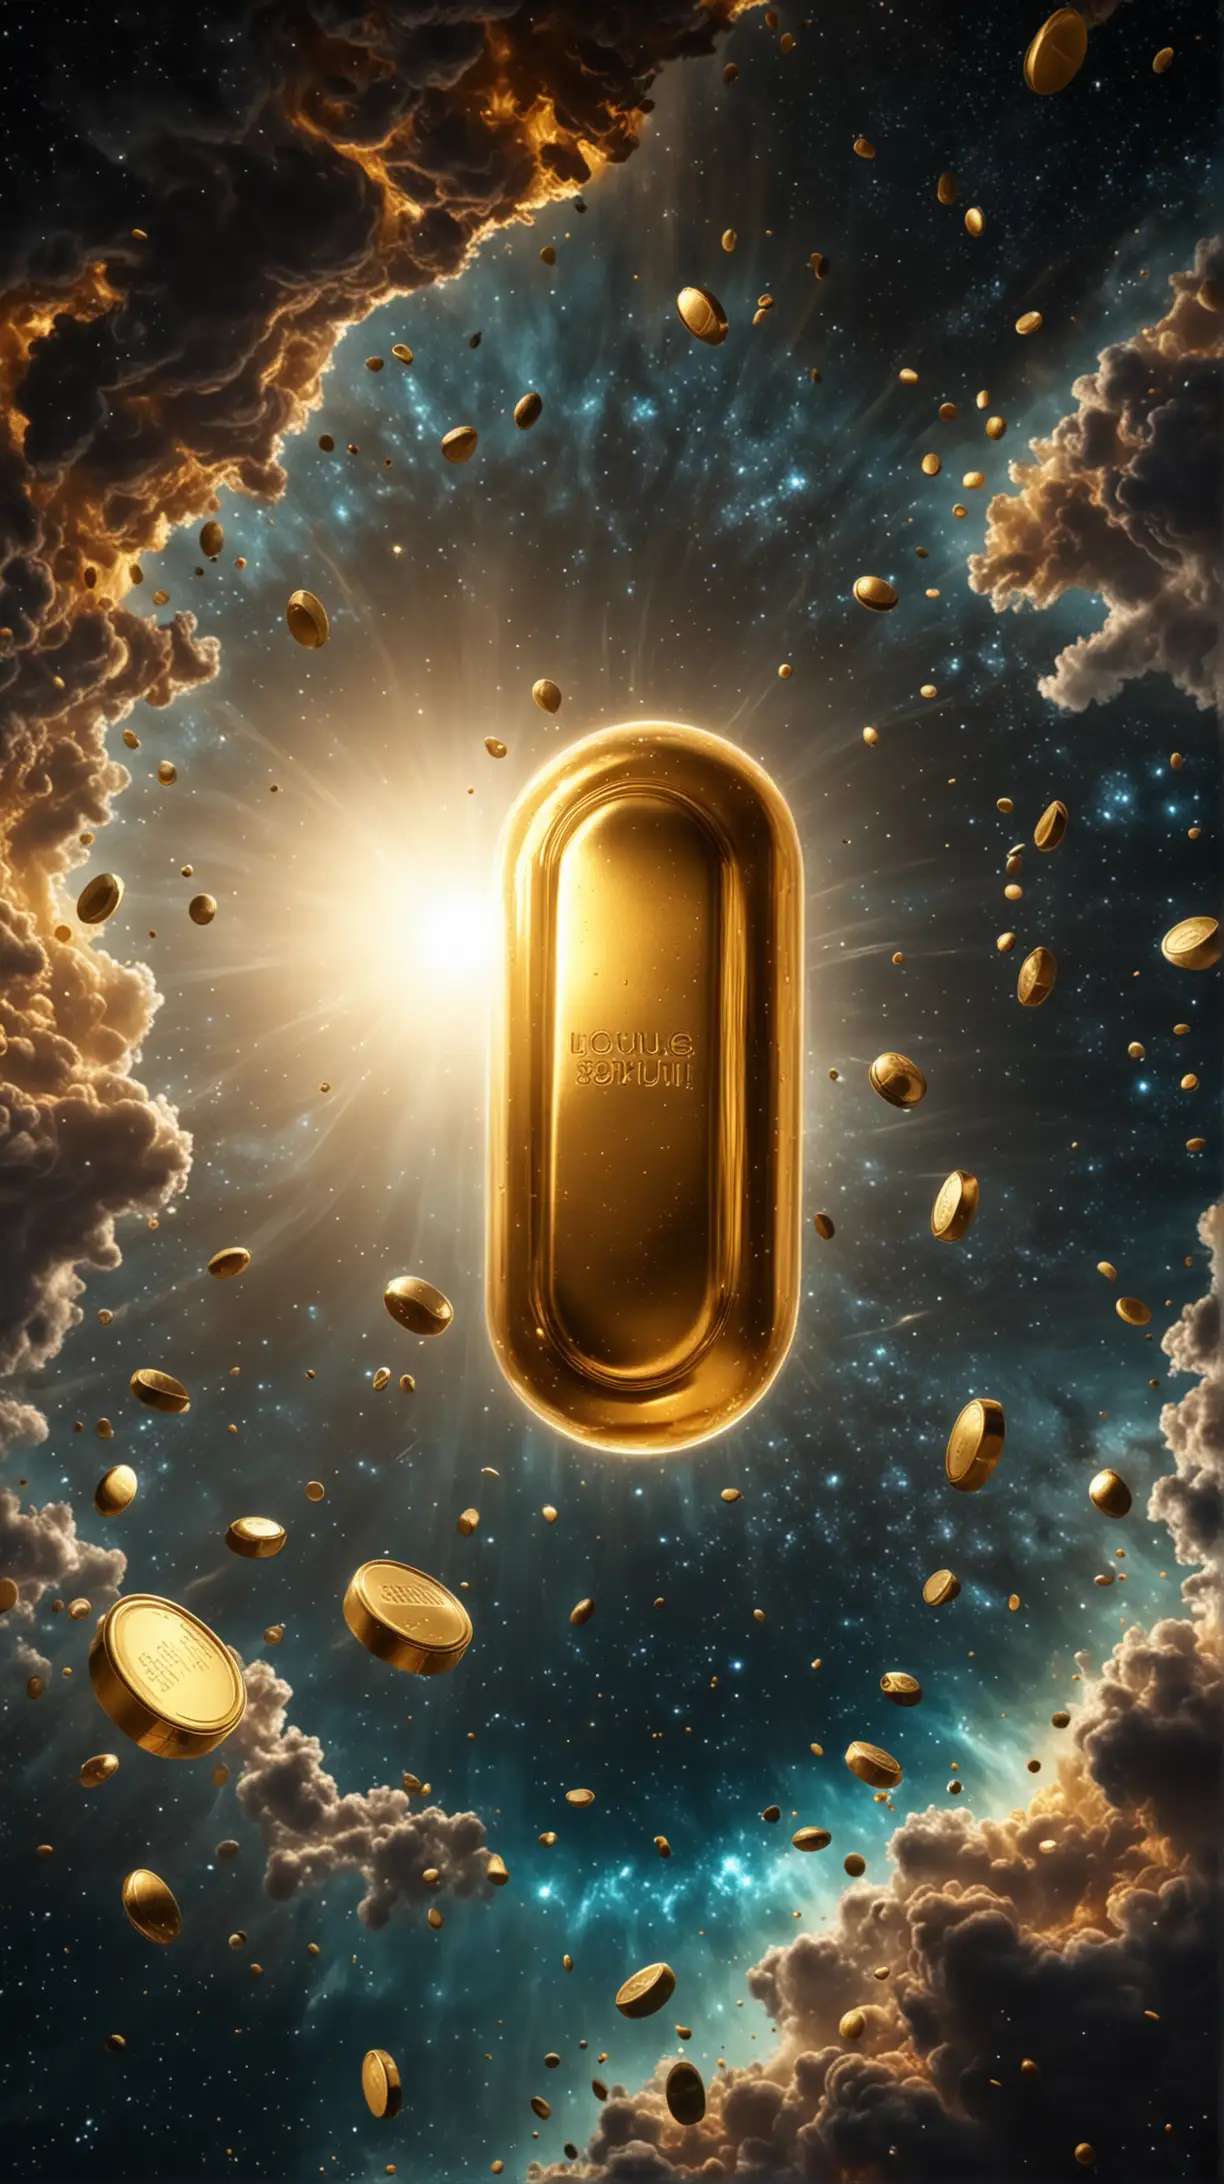 Golden Supplement Pill in Cosmic Expanse HyperRealistic 4K HDR Image